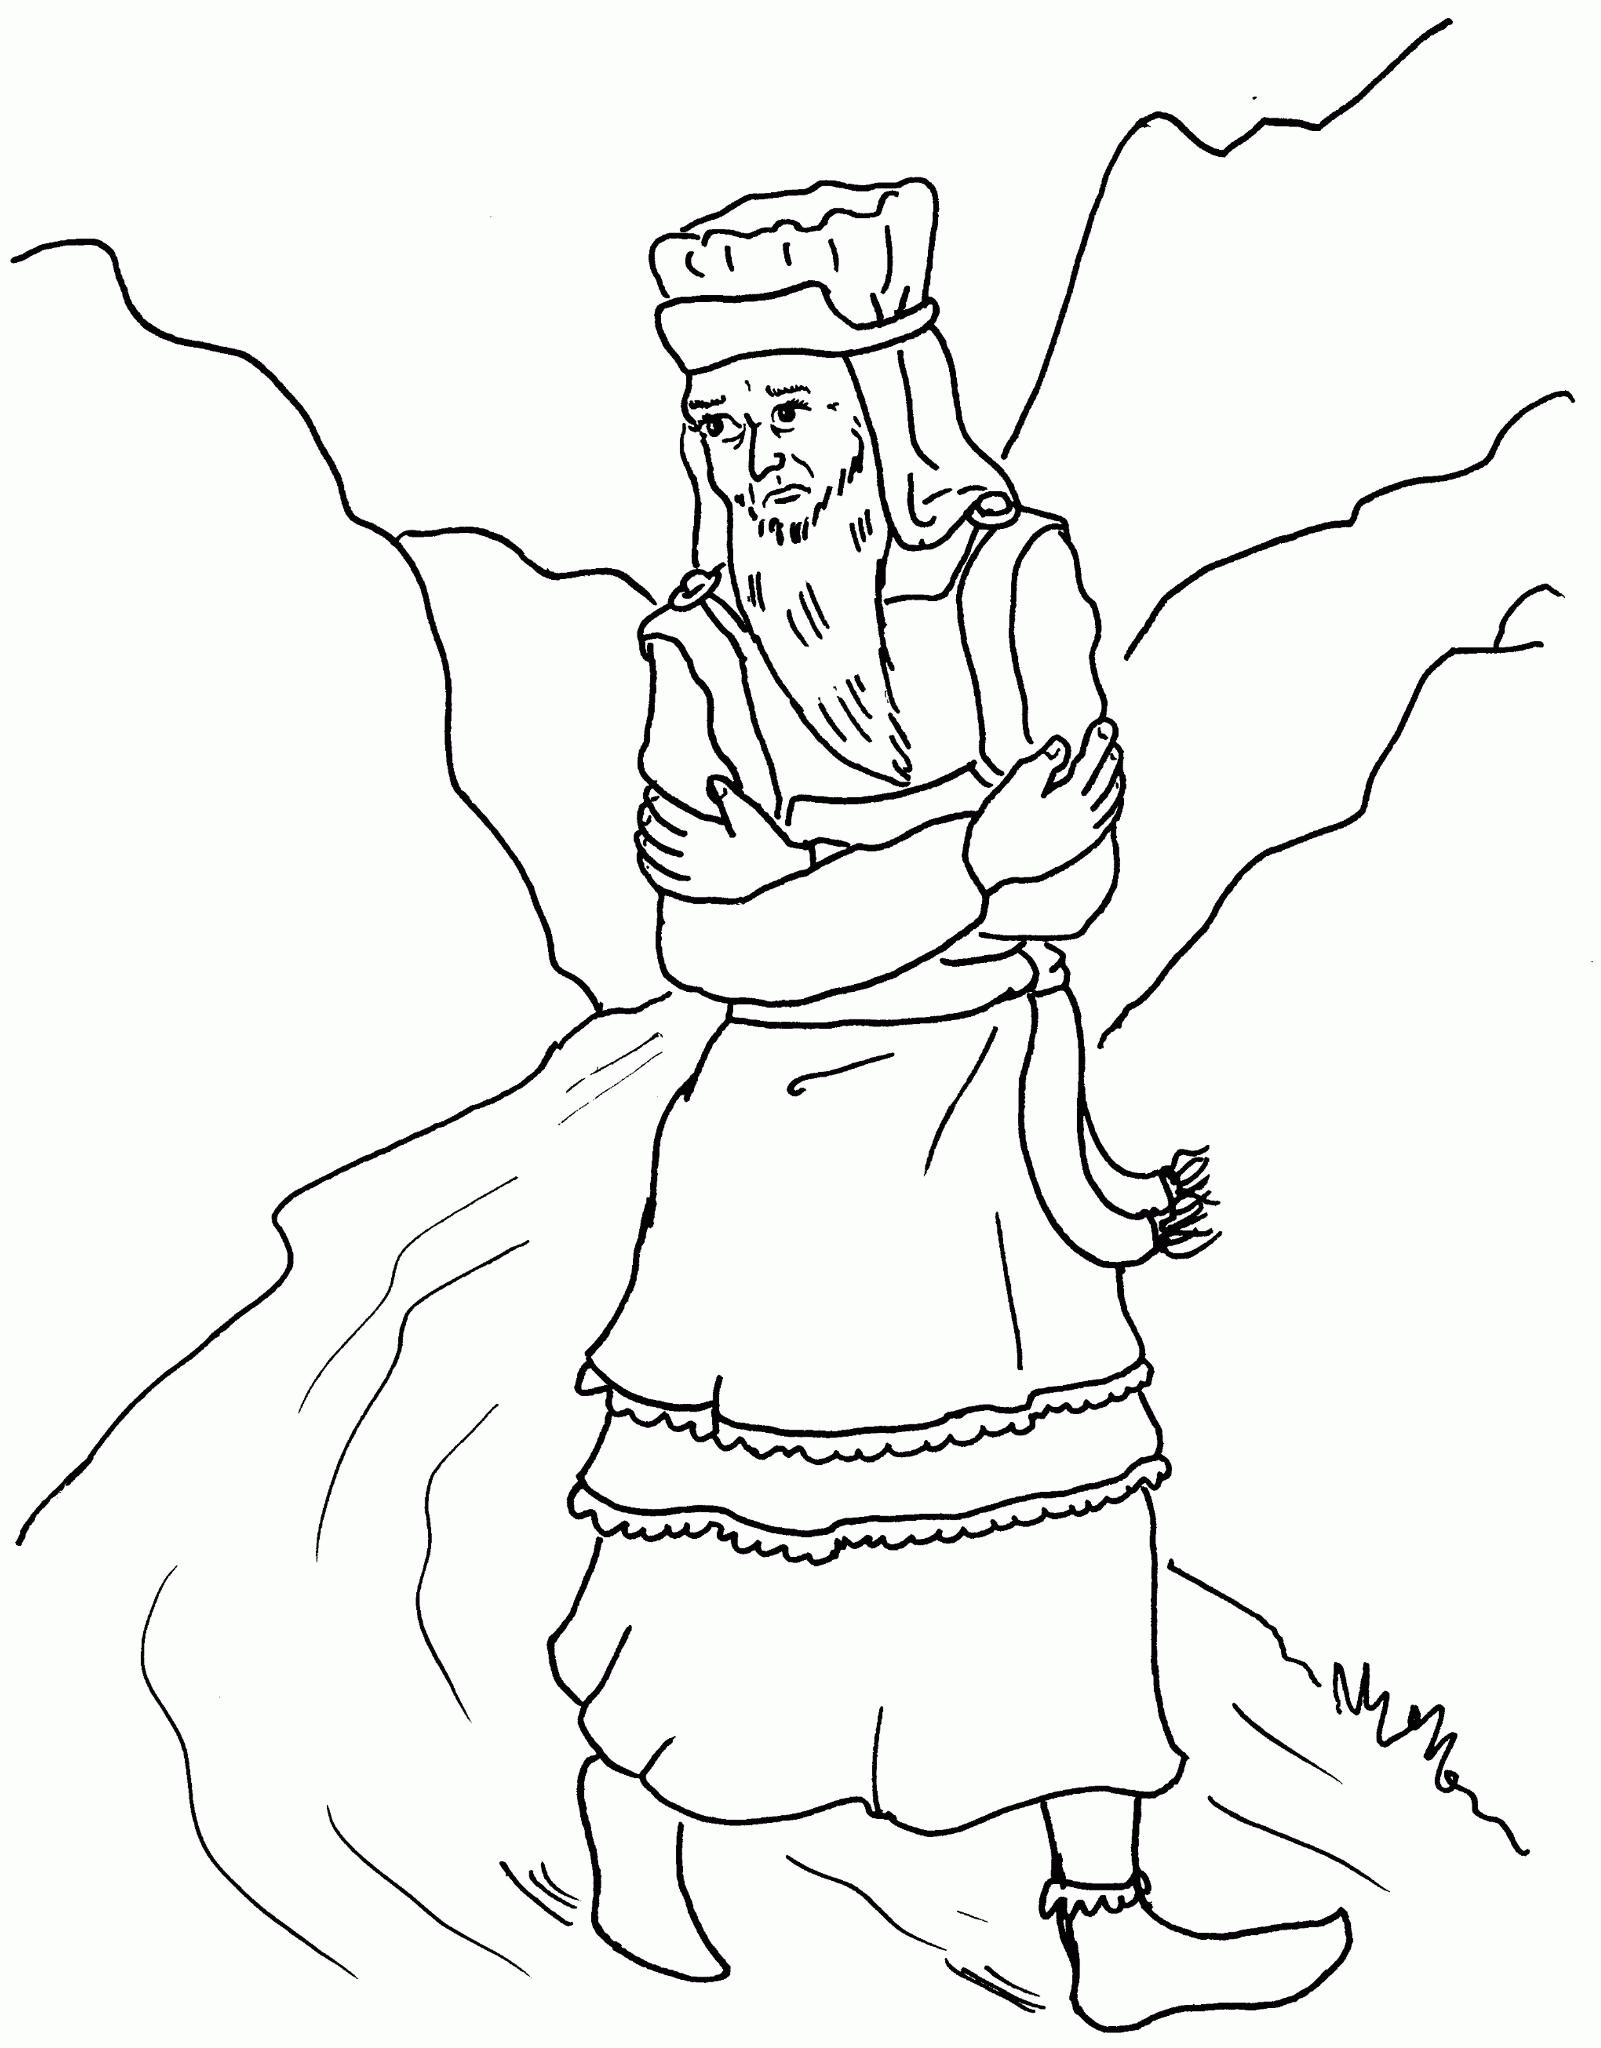 New Testament-The Good Samaritan Coloring Pages - Coloring Home